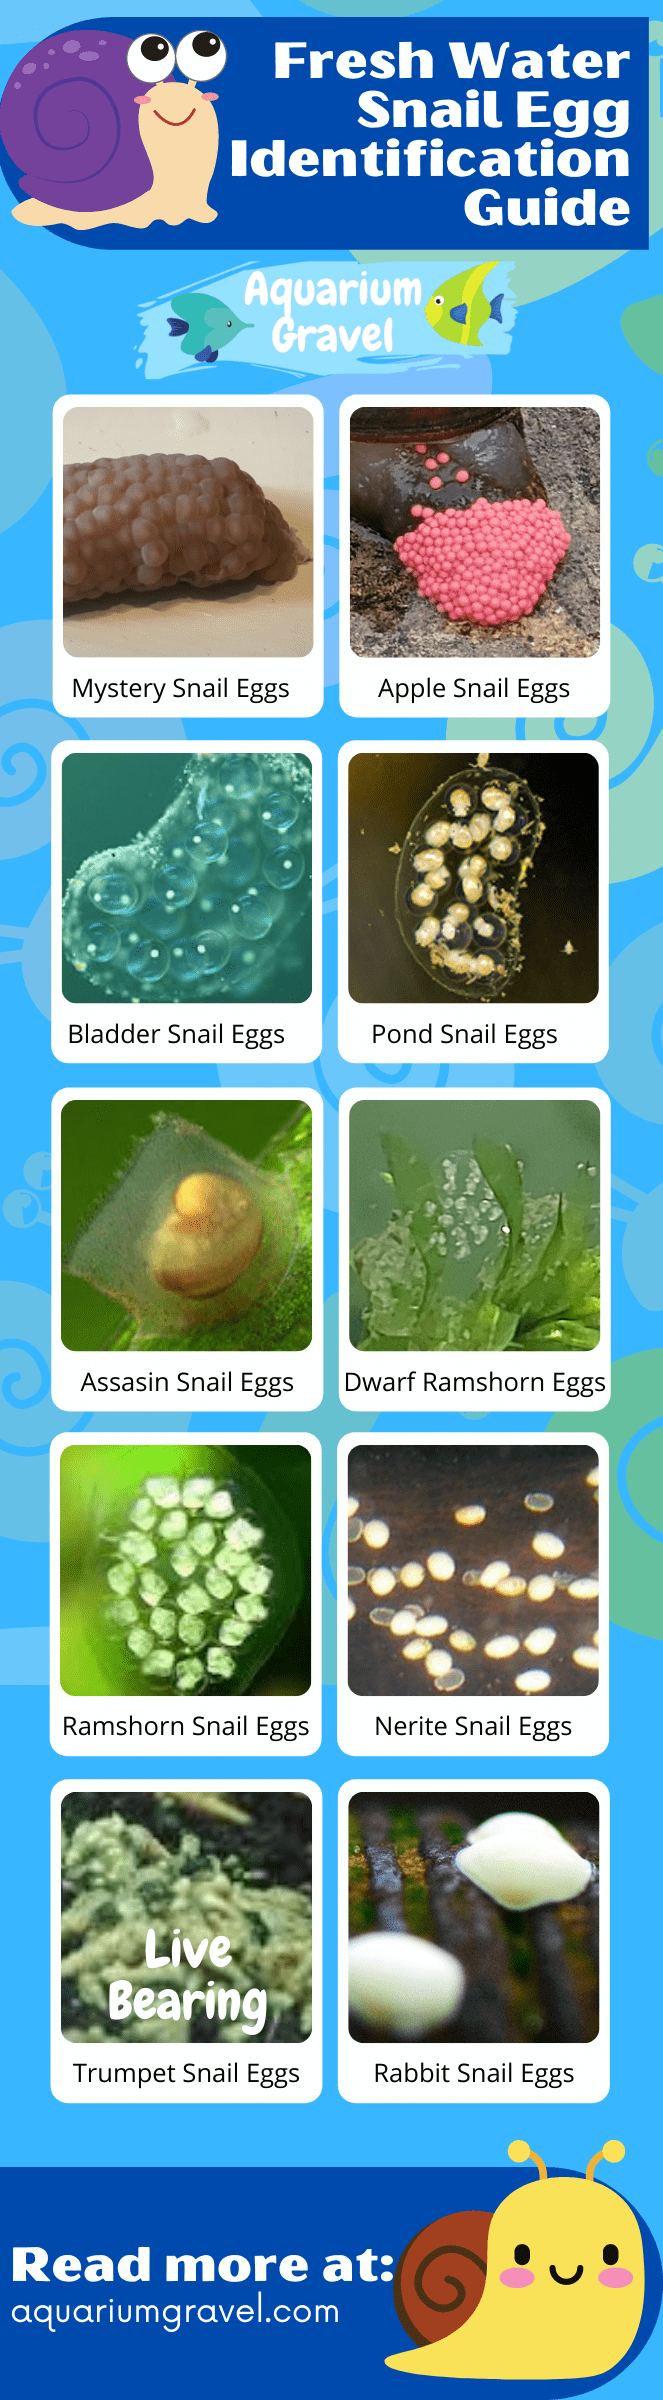 Contains images of mystery snail eggs, apple snail eggs, bladder snail eggs, pond snail eggs, assasin snail eggs, dwarf ramshorn and ramshorn eggs, nerite snail eggs, trumpet snial eggs and rabbit snail eggs 